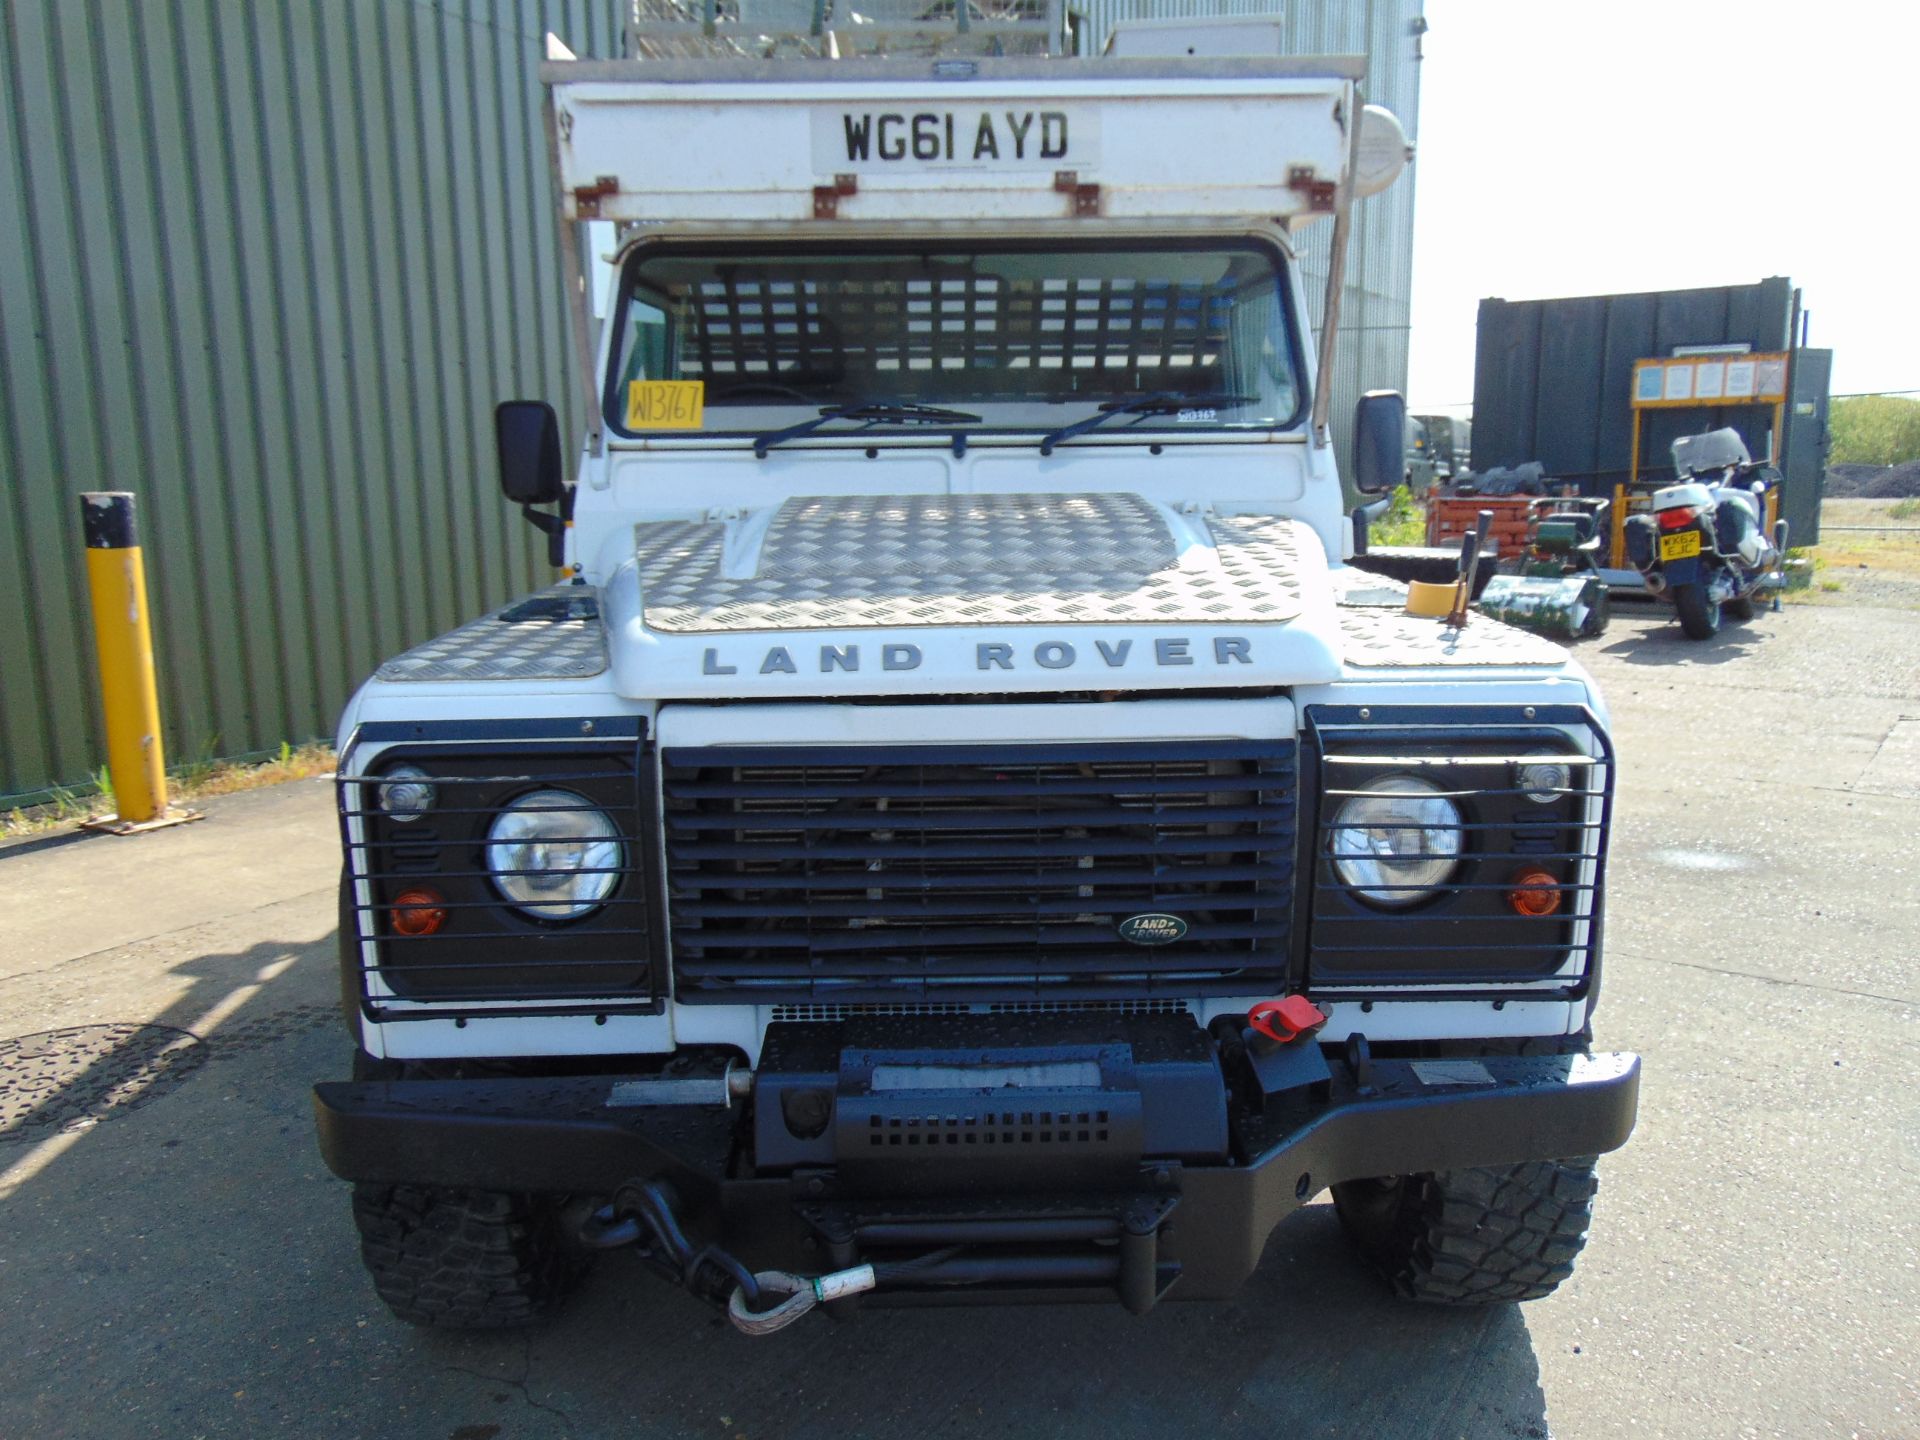 2011 Land Rover Defender 110 Puma hardtop 4x4 Utility vehicle (mobile workshop) with hydraulic winch - Image 4 of 53